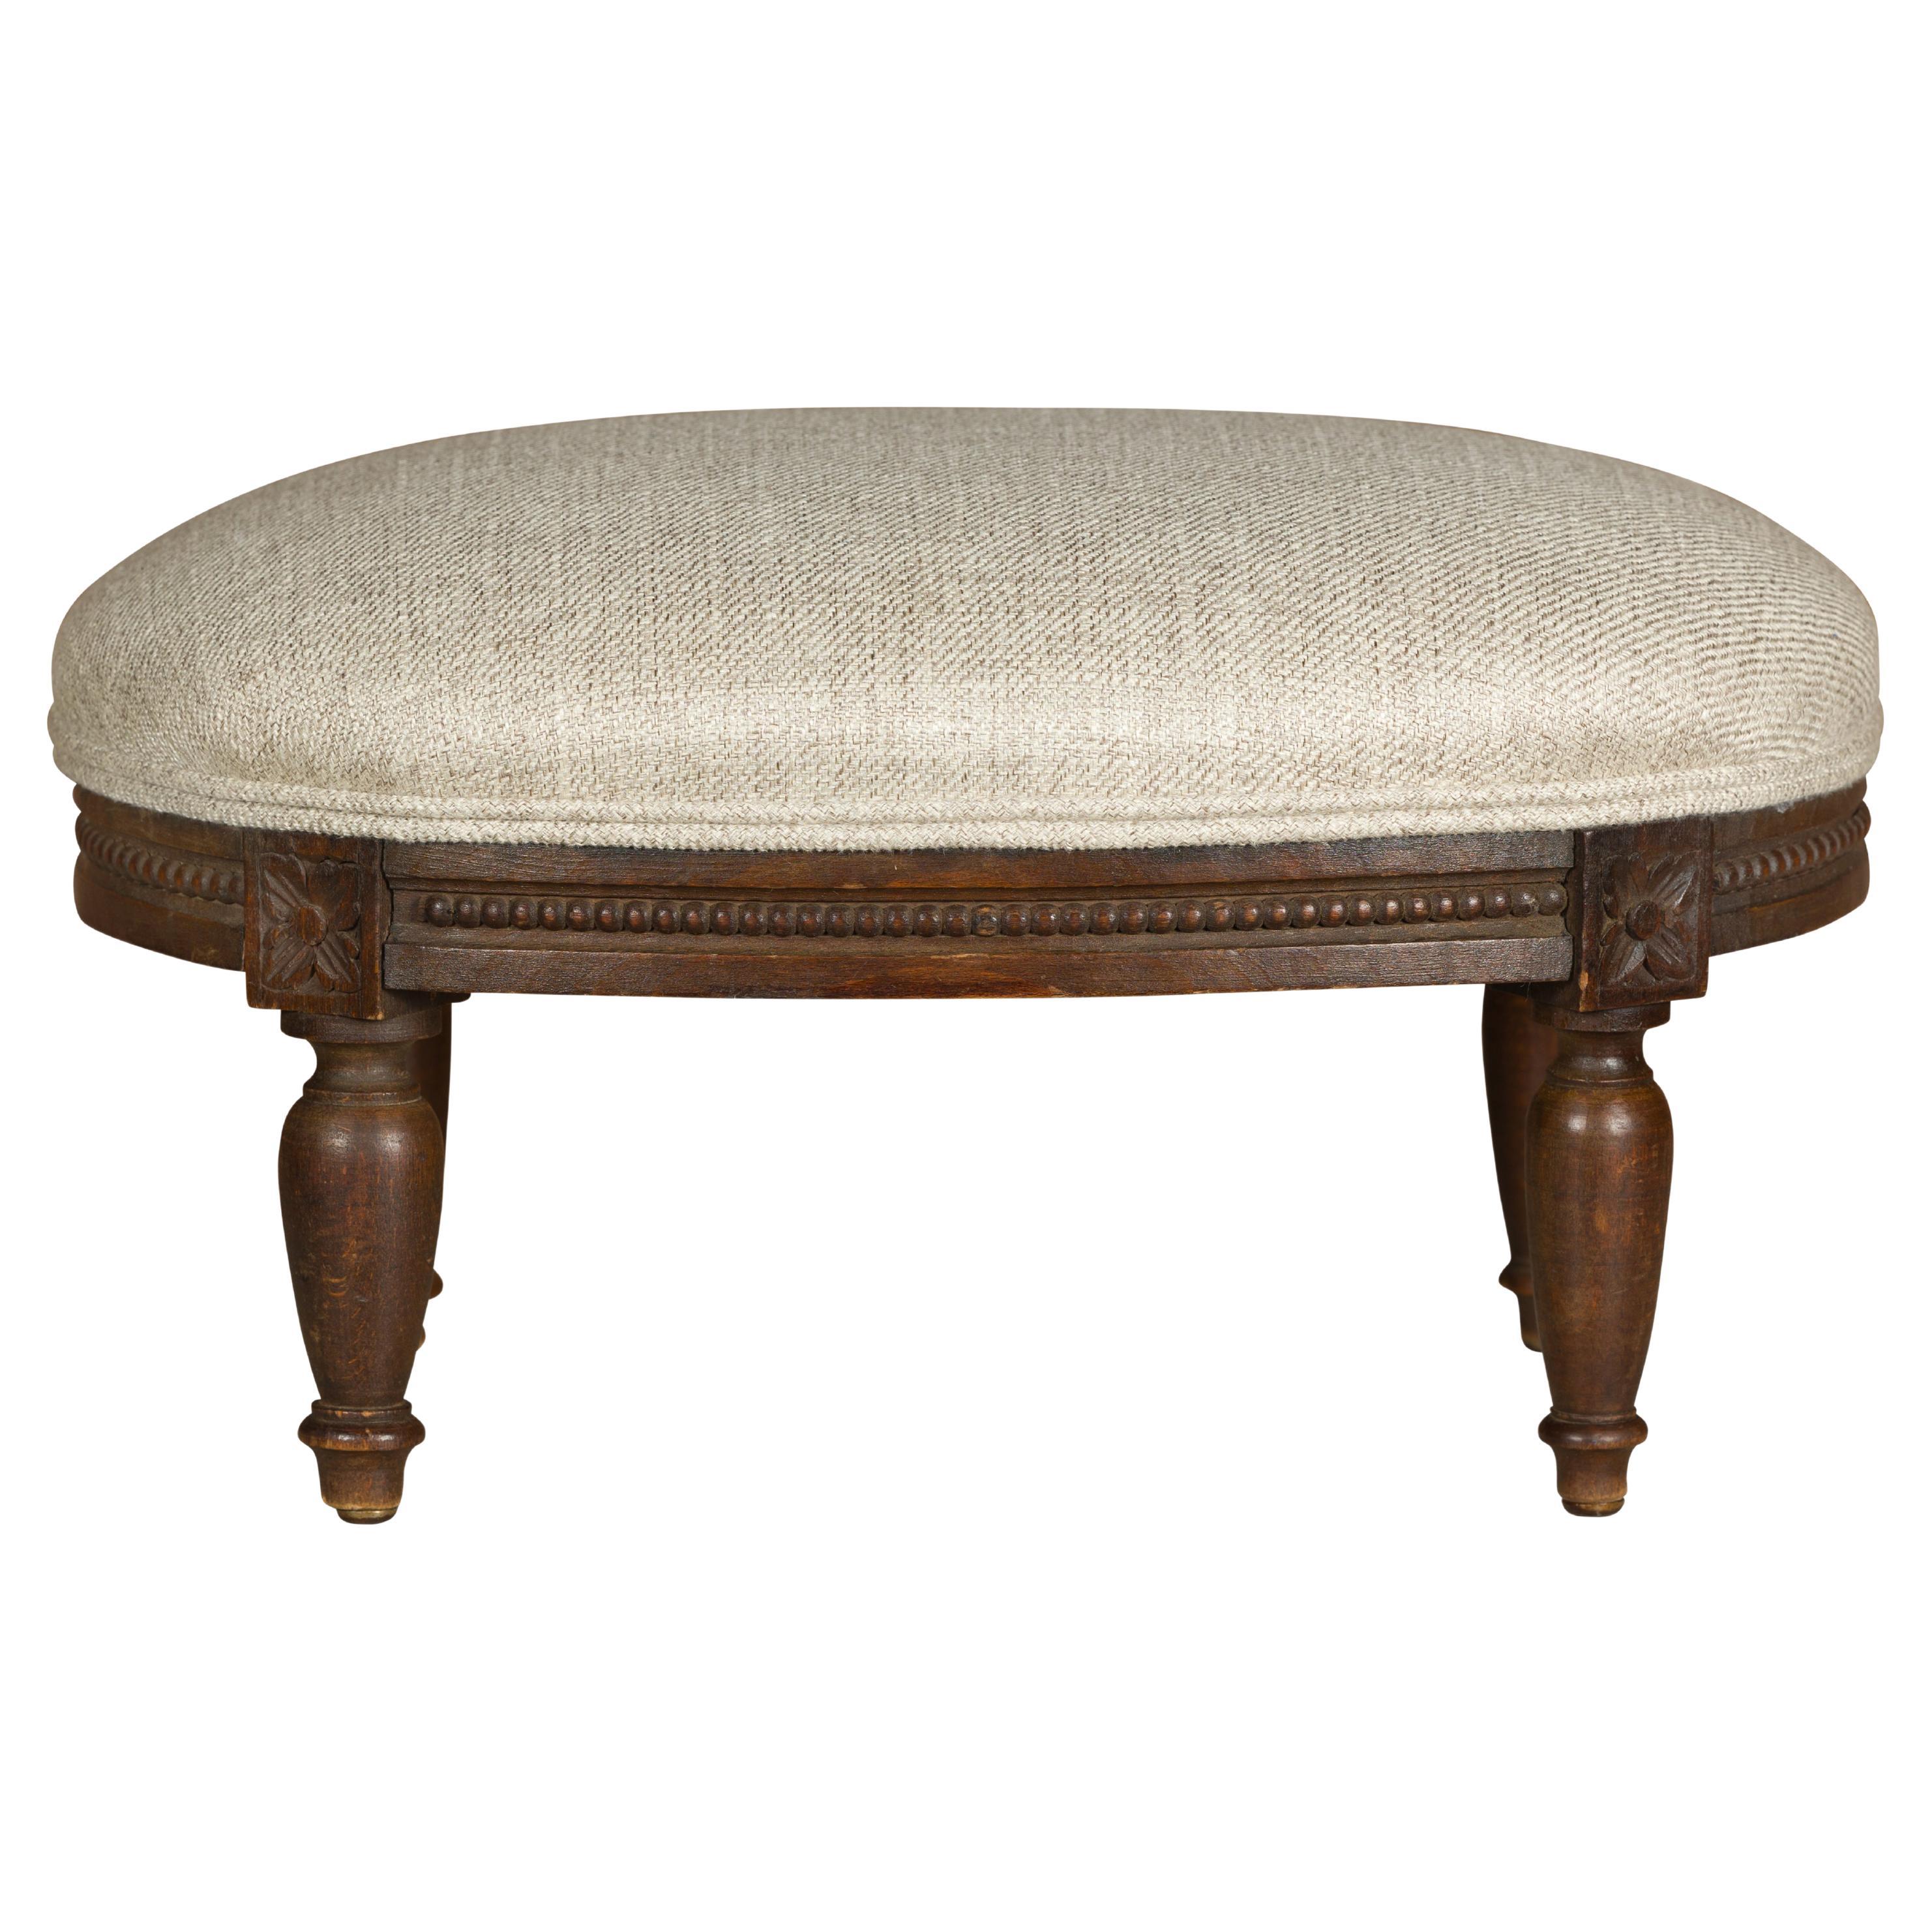 French Louis XVI Style 1900s Footstool with Carved Rosettes and Beads